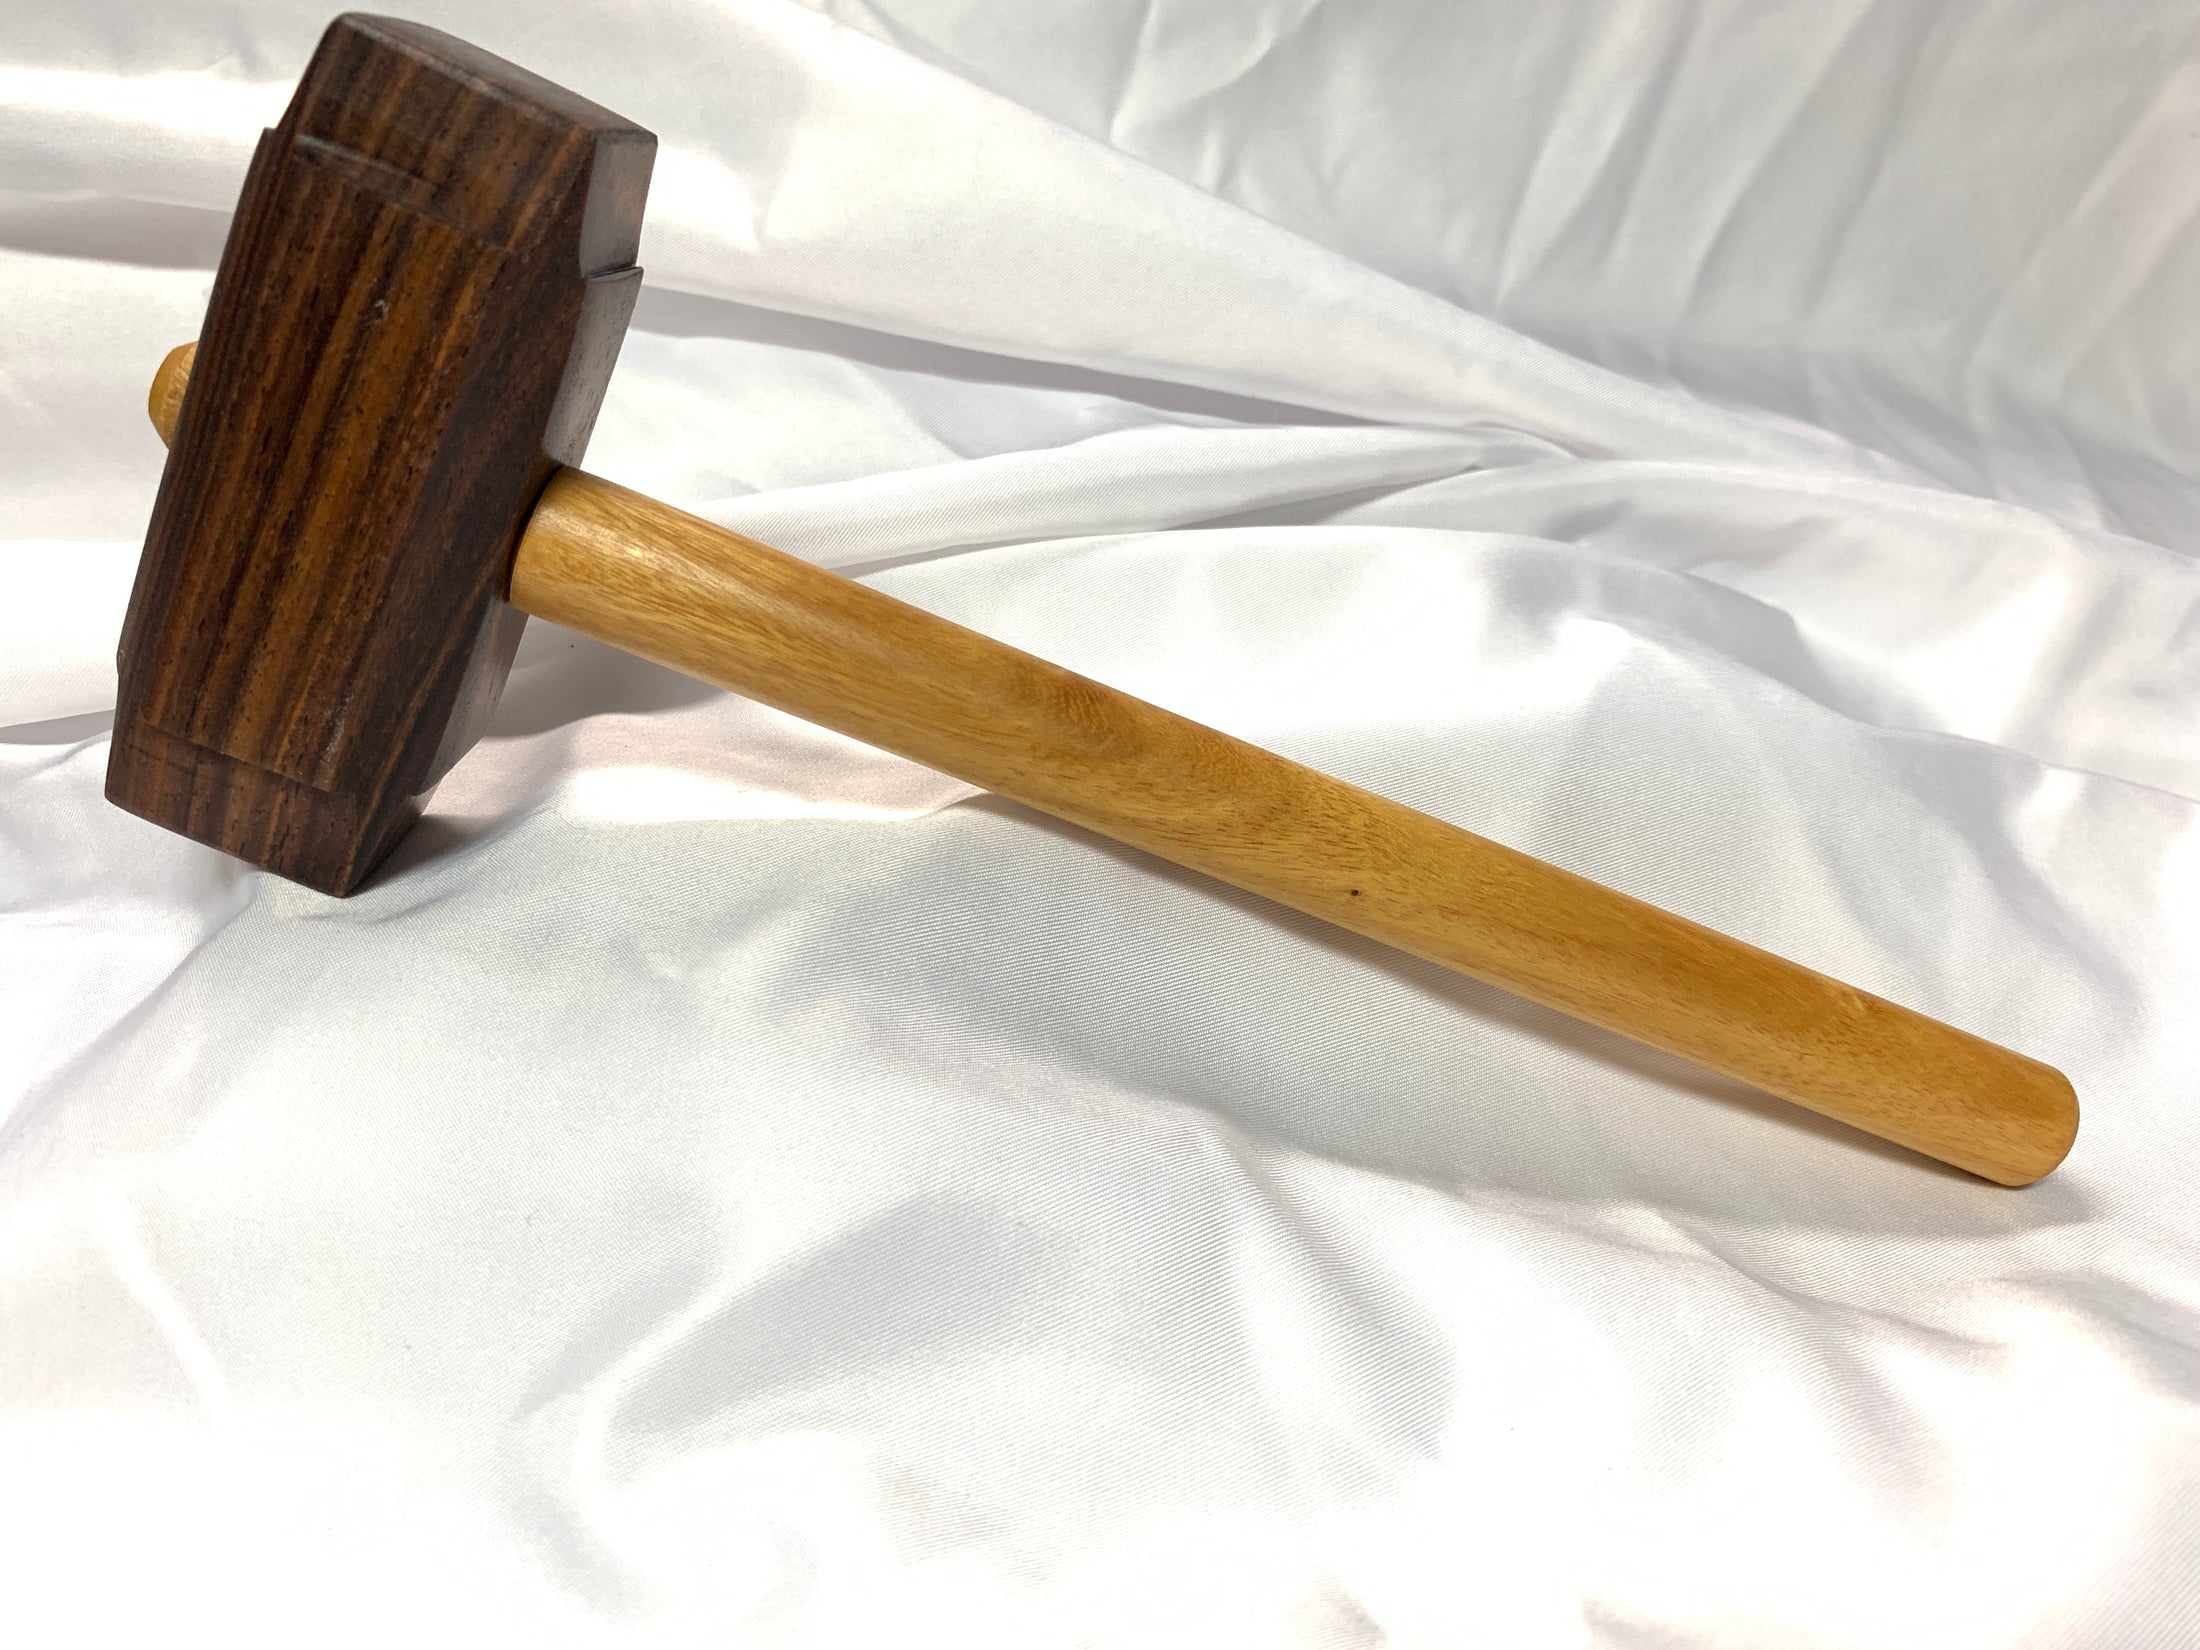 Thors Hammer Woodworking Mallet Cocobolo Head with Osage Orange Handle Kings Fine Woodworking